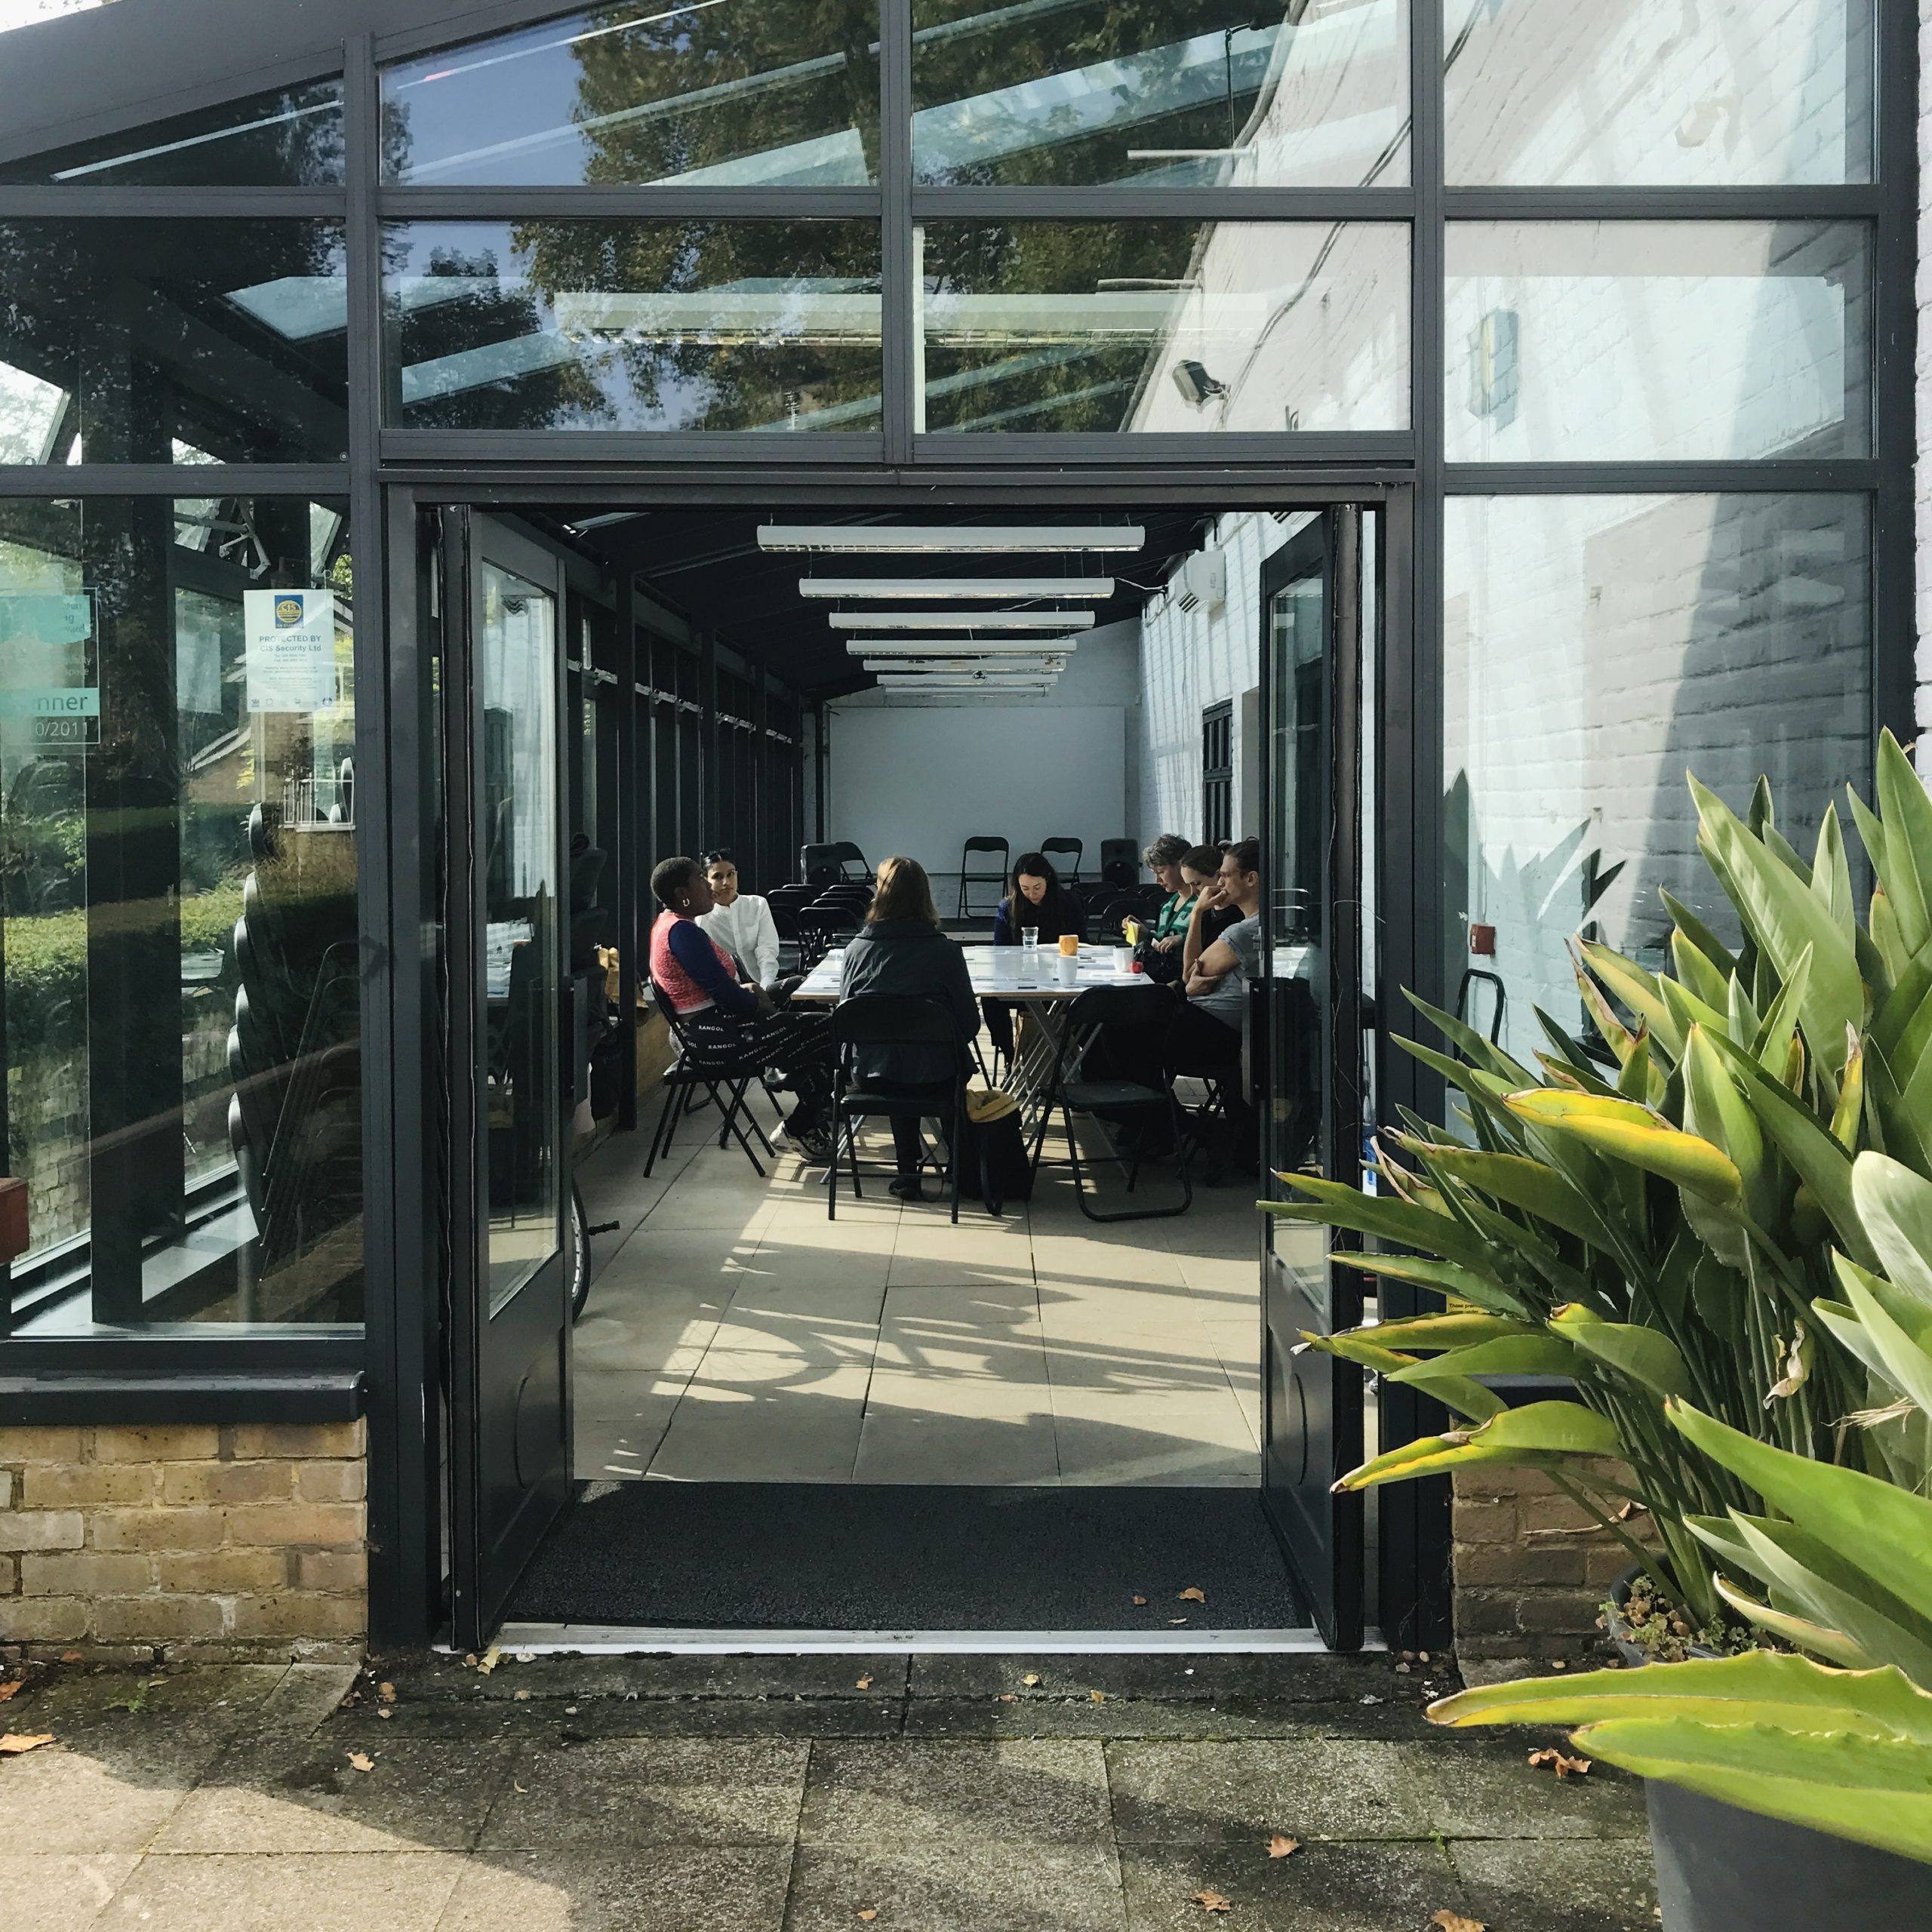 image of the conservatory at LUX from outside looking through an open door. A group of people sit in intense conversation.